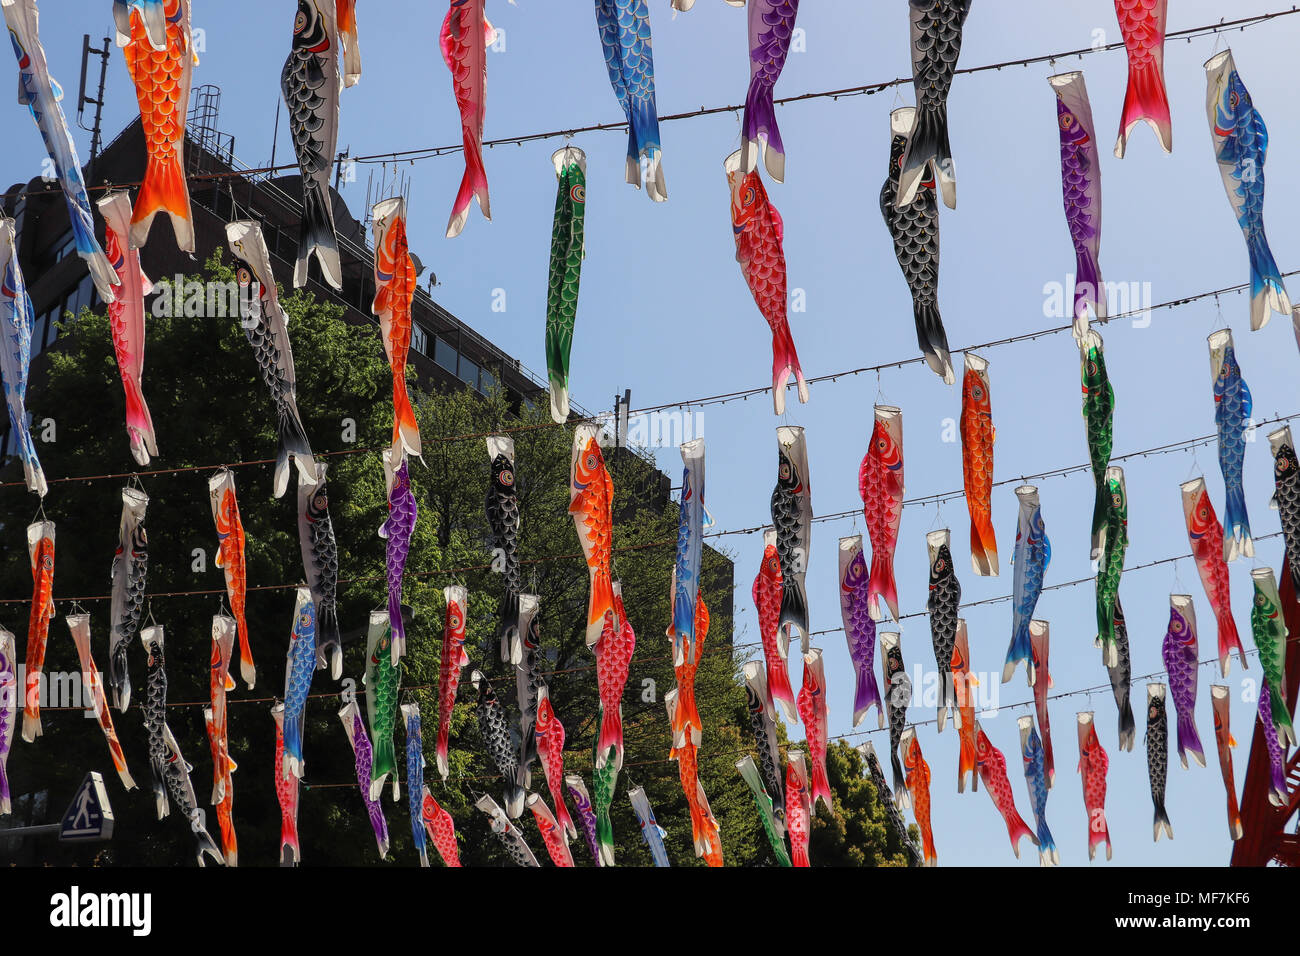 Many colorful paper fish lanterns or windsocks hang on diagonal strings high above the viewer against a blue sky; celebrate Children's Day in Japan. Stock Photo